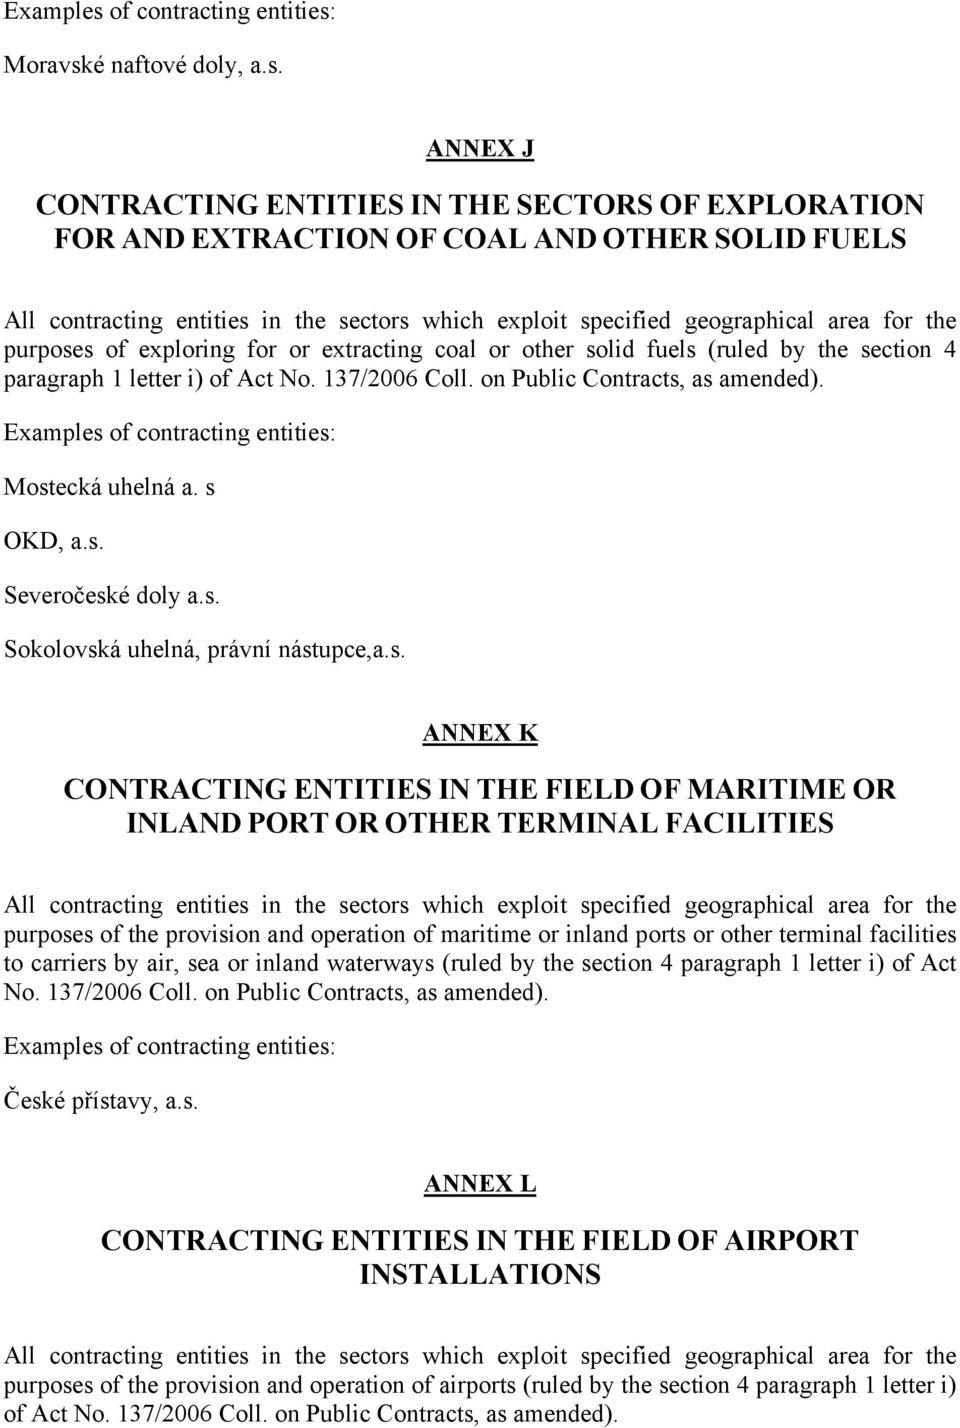 ANNEX J CONTRACTING ENTITIES IN THE SECTORS OF EXPLORATION FOR AND EXTRACTION OF COAL AND OTHER SOLID FUELS All contracting entities in the sectors which exploit specified geographical area for the